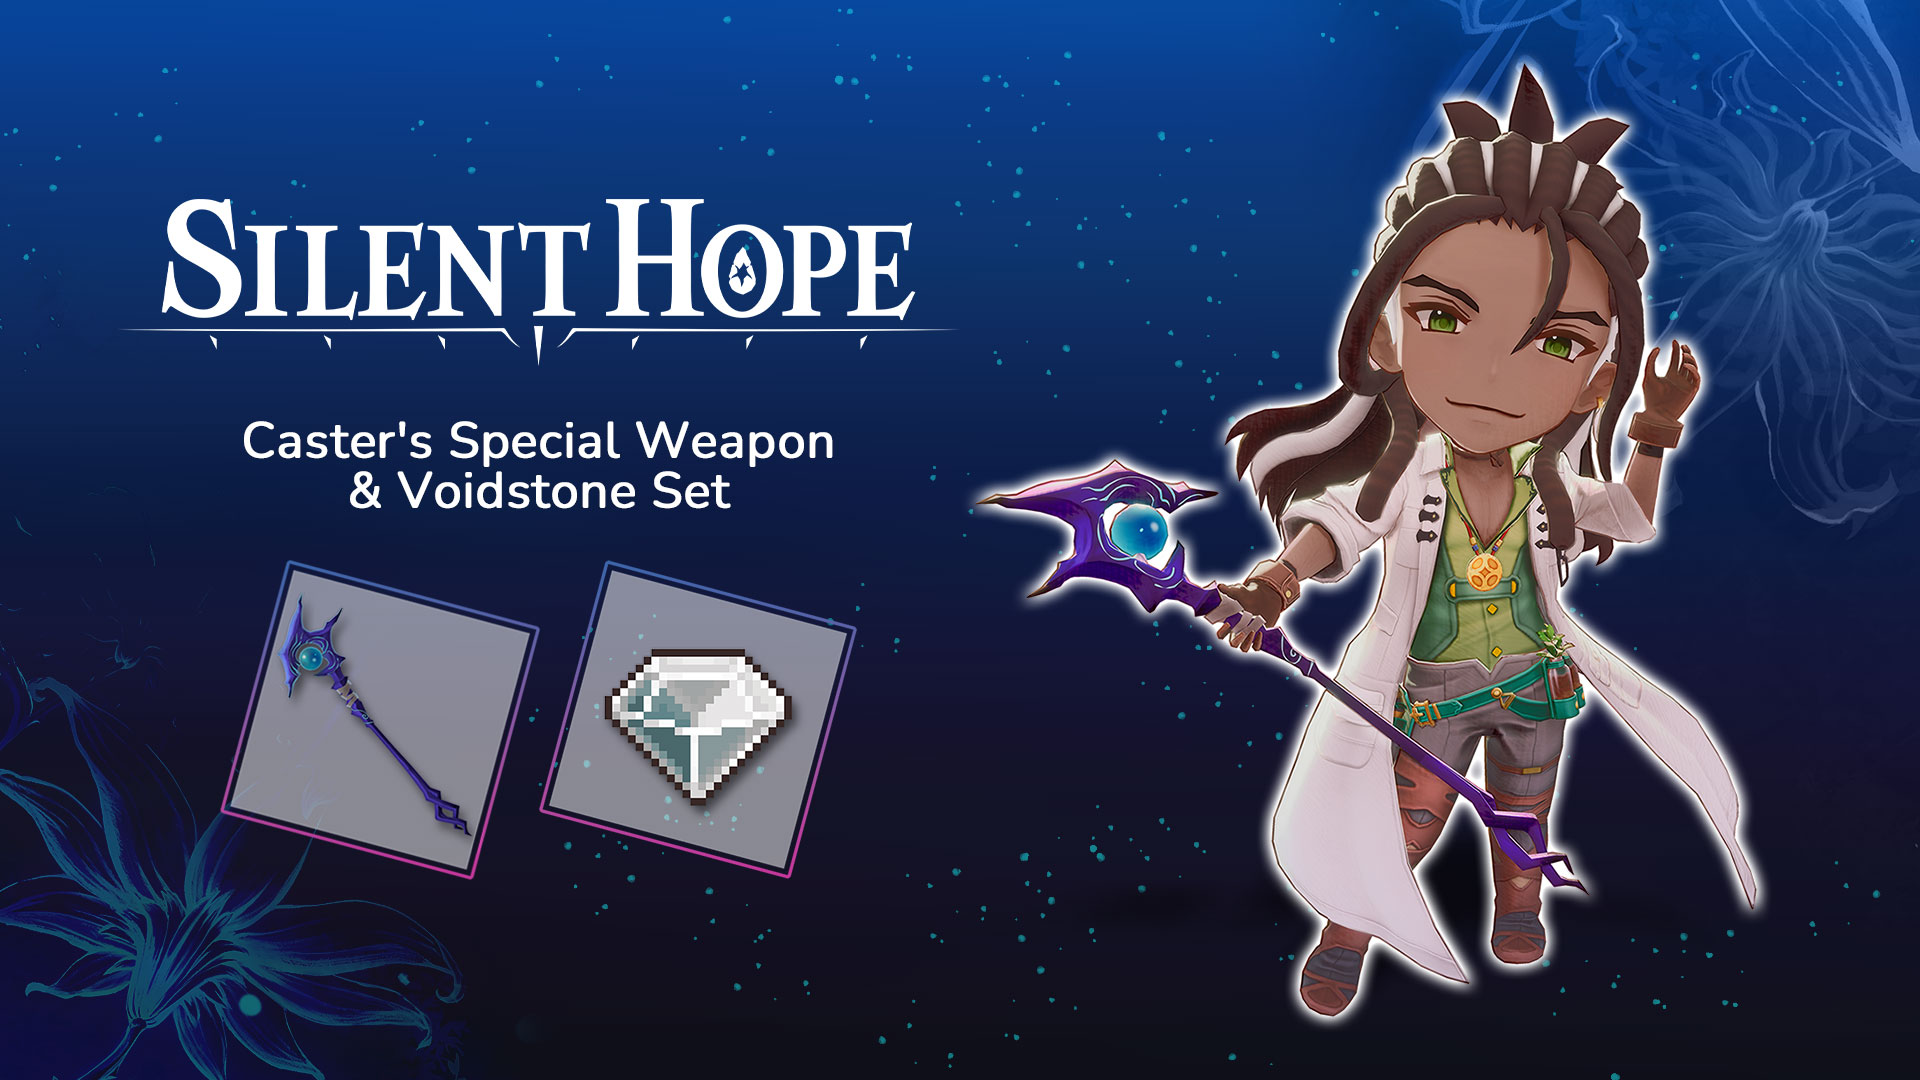 Caster's Special Weapon & Voidstone Set